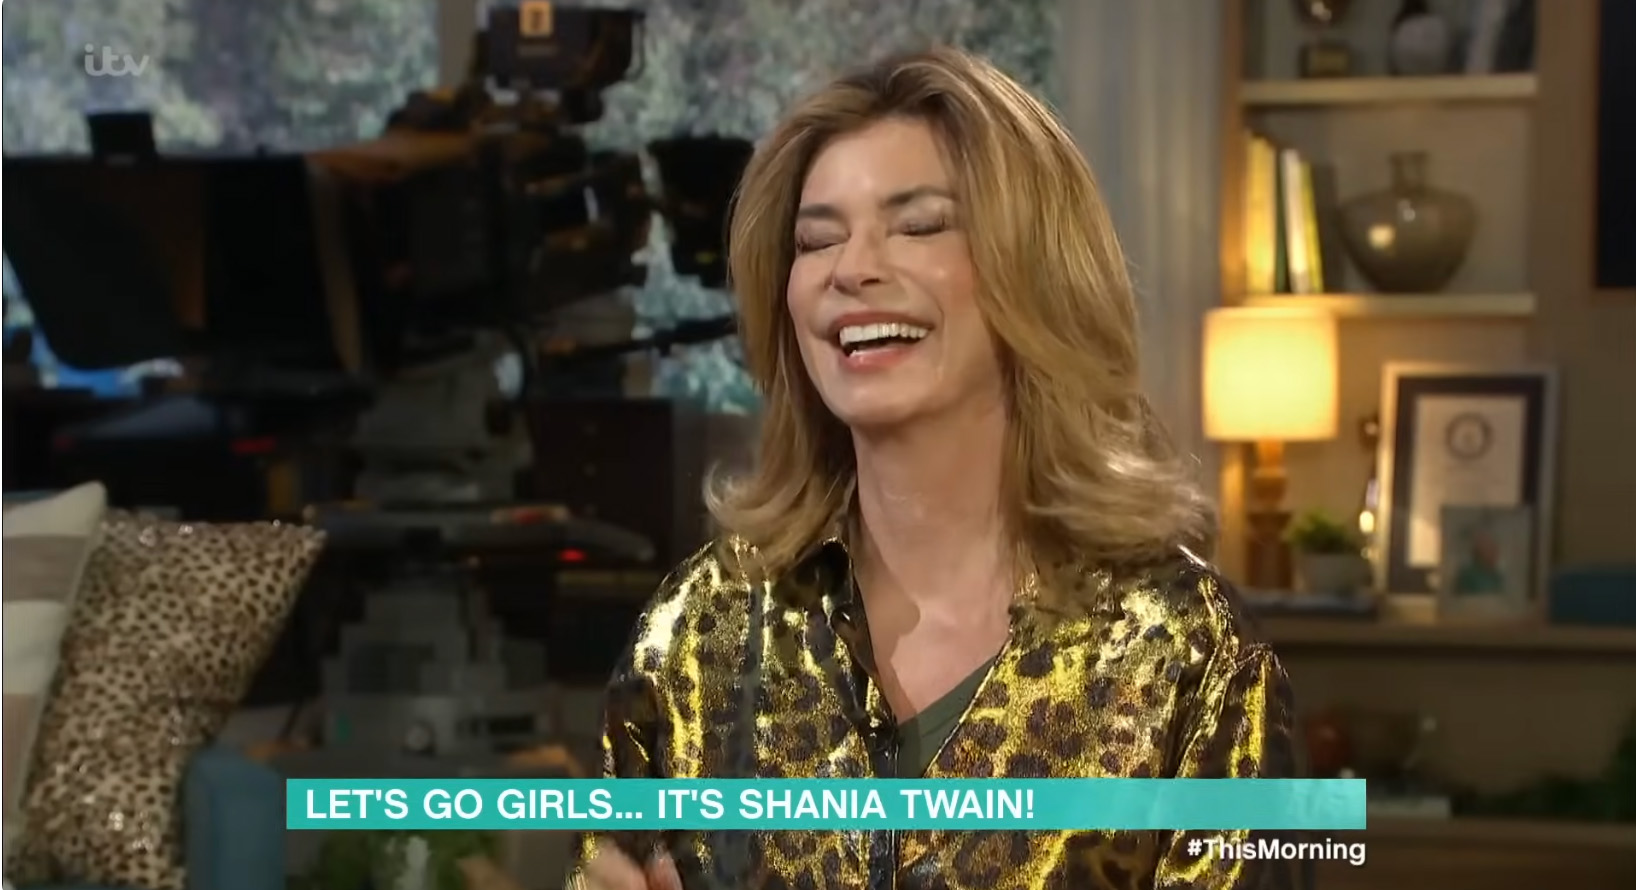 In a recent interview with This Morning's talk show, Shania fans said the singer looked unrecognizable